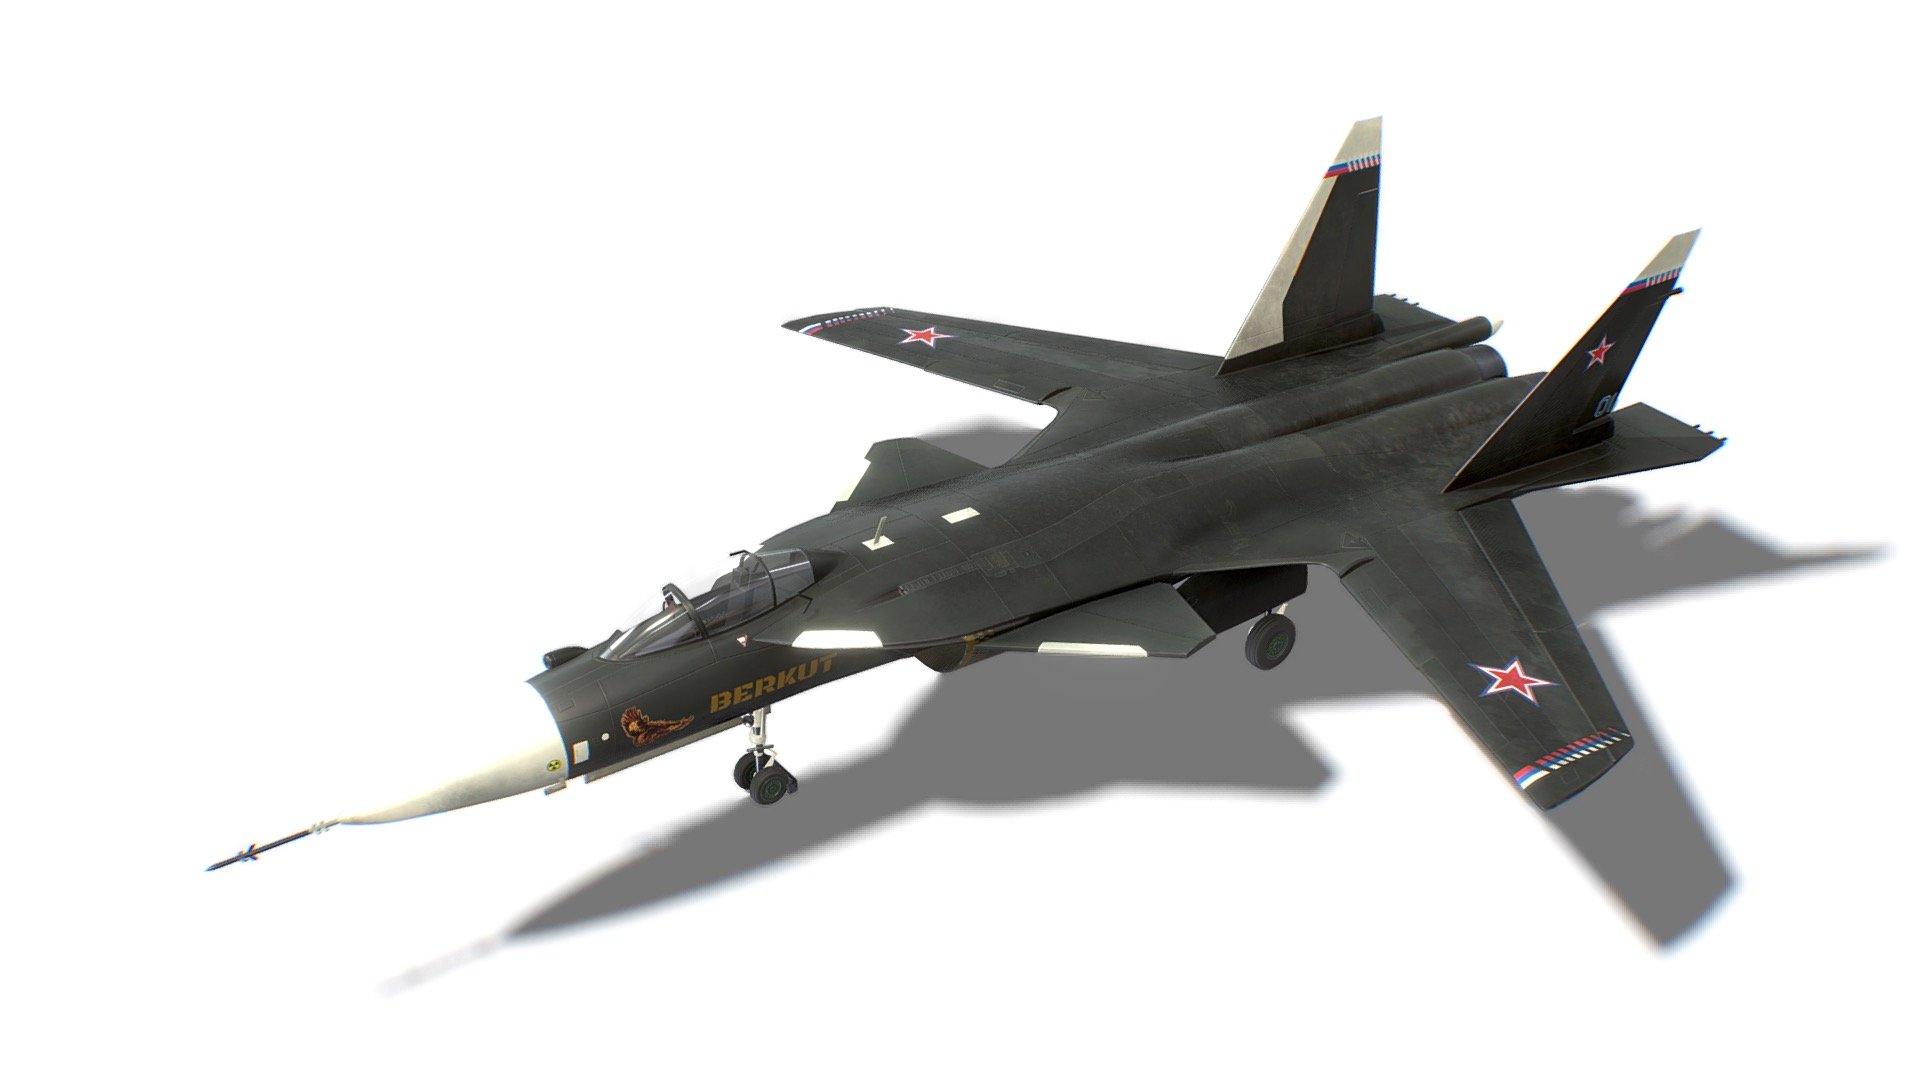 The model looks like a SU-47 Firkin. All parts of the model were made in full accordance with the original. Each dynamical part is separated and has correct pivot points, that allow easy animation and use in games. 

Advanced information:
- single material for whole mesh;
- set of 4K PBR textures;
- set of 4K Unreal PBR textures;
- set of 4K Unity PBR textures;
- set of 4K CryEngine PBR textures;
- FBX, DAE, ABC, OBJ and X3D file formats;
- 4 level of details;

Mesh details:
LOD0 - 13235
LOD1 - 6616
LOD2 - 3308
LOD3 - 299 - SU-47 Firkin Jet Fighter Aircraft - 3D model by FreakGames 3d model